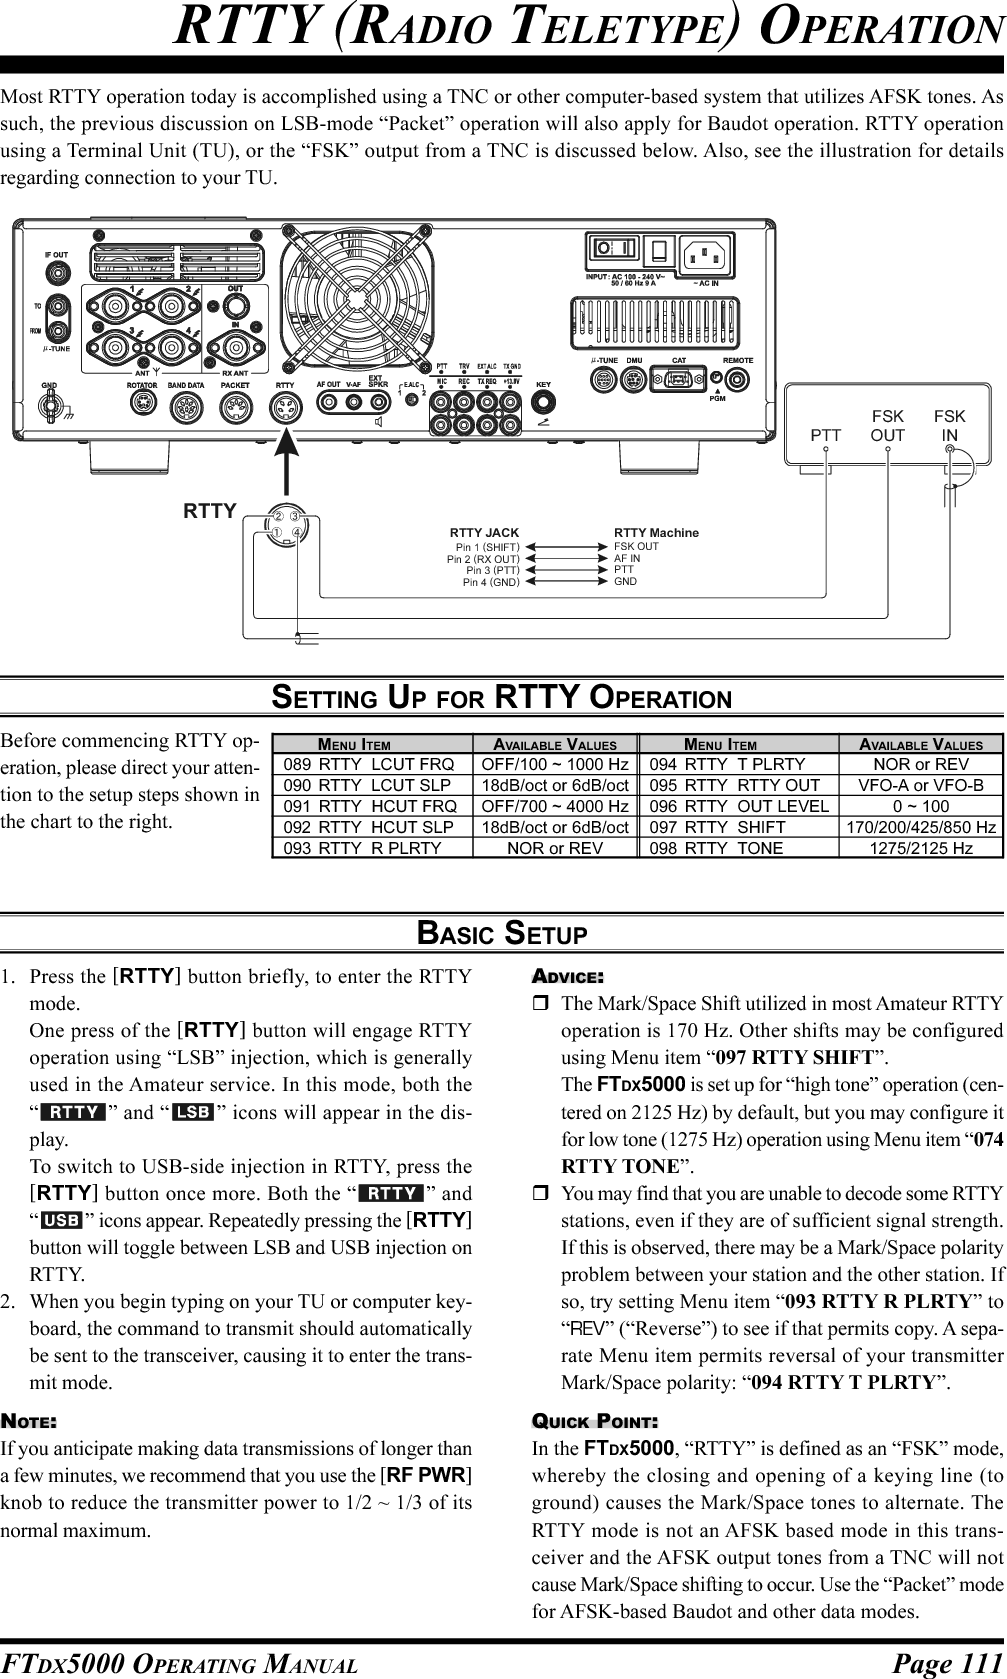 Page 111FTDX5000 OPERATING MANUALMost RTTY operation today is accomplished using a TNC or other computer-based system that utilizes AFSK tones. Assuch, the previous discussion on LSB-mode “Packet” operation will also apply for Baudot operation. RTTY operationusing a Terminal Unit (TU), or the “FSK” output from a TNC is discussed below. Also, see the illustration for detailsregarding connection to your TU.SETTING UP FOR RTTY OPERATIONBefore commencing RTTY op-eration, please direct your atten-tion to the setup steps shown inthe chart to the right.BASIC SETUP1. Press the [RTTY] button briefly, to enter the RTTYmode.One press of the [RTTY] button will engage RTTYoperation using “LSB” injection, which is generallyused in the Amateur service. In this mode, both the“” and “ ” icons will appear in the dis-play.To switch to USB-side injection in RTTY, press the[RTTY] button once more. Both the “ ” and“” icons appear. Repeatedly pressing the [RTTY]button will toggle between LSB and USB injection onRTTY.2. When you begin typing on your TU or computer key-board, the command to transmit should automaticallybe sent to the transceiver, causing it to enter the trans-mit mode.NOTE:If you anticipate making data transmissions of longer thana few minutes, we recommend that you use the [RF PWR]knob to reduce the transmitter power to 1/2 ~ 1/3 of itsnormal maximum.RTTY (RADIO TELETYPE) OPERATIONFSKOUTPTTFSKIN①④③②RTTYRTTY JACK RTTY MachinePin 1 (SHIFT)Pin 2Pin 3Pin 4 (RX OUT) (PTT) (GND)FSK OUTAF INPTTGNDADVICE:The Mark/Space Shift utilized in most Amateur RTTYoperation is 170 Hz. Other shifts may be configuredusing Menu item “097 RTTY SHIFT”.The FTDX5000 is set up for “high tone” operation (cen-tered on 2125 Hz) by default, but you may configure itfor low tone (1275 Hz) operation using Menu item “074RTTY TONE”.You may find that you are unable to decode some RTTYstations, even if they are of sufficient signal strength.If this is observed, there may be a Mark/Space polarityproblem between your station and the other station. Ifso, try setting Menu item “093 RTTY R PLRTY” to“REV” (“Reverse”) to see if that permits copy. A sepa-rate Menu item permits reversal of your transmitterMark/Space polarity: “094 RTTY T PLRTY”.QUICK POINT:In the FTDX5000, “RTTY” is defined as an “FSK” mode,whereby the closing and opening of a keying line (toground) causes the Mark/Space tones to alternate. TheRTTY mode is not an AFSK based mode in this trans-ceiver and the AFSK output tones from a TNC will notcause Mark/Space shifting to occur. Use the “Packet” modefor AFSK-based Baudot and other data modes.MENU ITEM089 RTTY LCUT FRQ090 RTTY LCUT SLP091 RTTY HCUT FRQ092 RTTY HCUT SLP093 RTTY R PLRTYAVAILABLE VALUESOFF/100 ~ 1000 Hz18dB/oct or 6dB/octOFF/700 ~ 4000 Hz18dB/oct or 6dB/octNOR or REVMENU ITEM094 RTTY T PLRTY095 RTTY RTTY OUT096 RTTY OUT LEVEL097 RTTY SHIFT098 RTTY TONEAVAILABLE VALUESNOR or REVVFO-A or VFO-B0 ~ 100170/200/425/850 Hz1275/2125 Hz